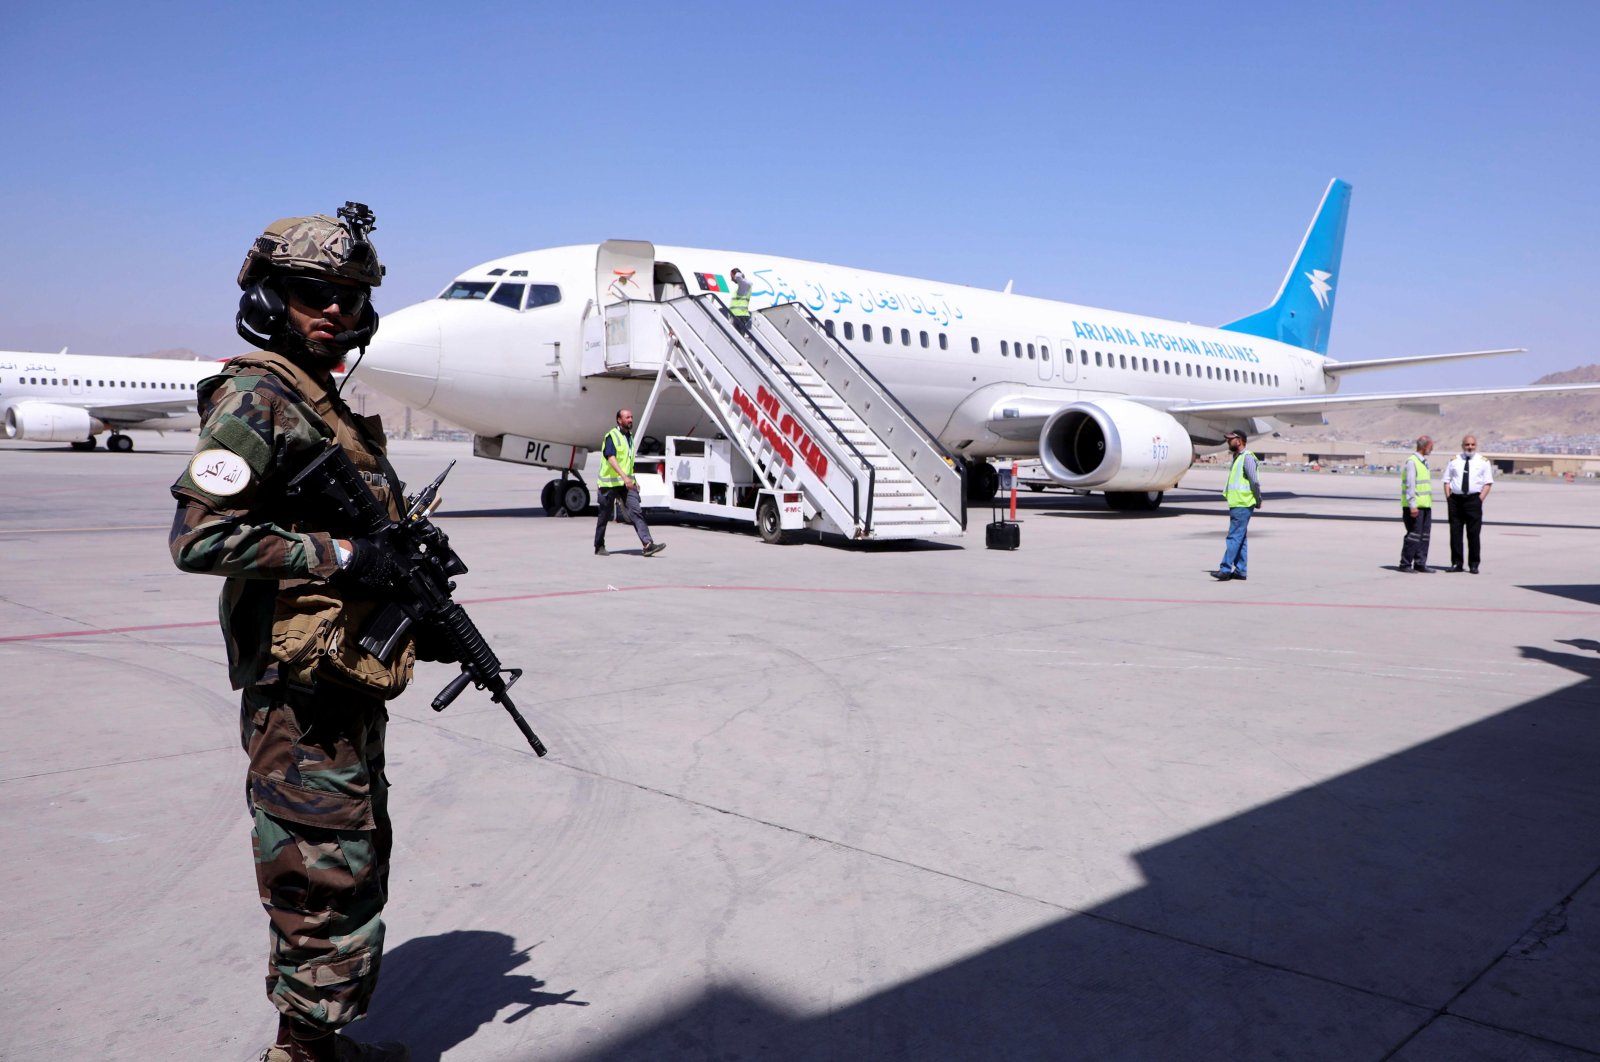 A member of Taliban forces stands guard next to a plane that has arrived from Kandahar at Kabul Hamid Karzai International Airport in Kabul, Afghanistan, Sept. 5, 2021. (Reuters Photo)